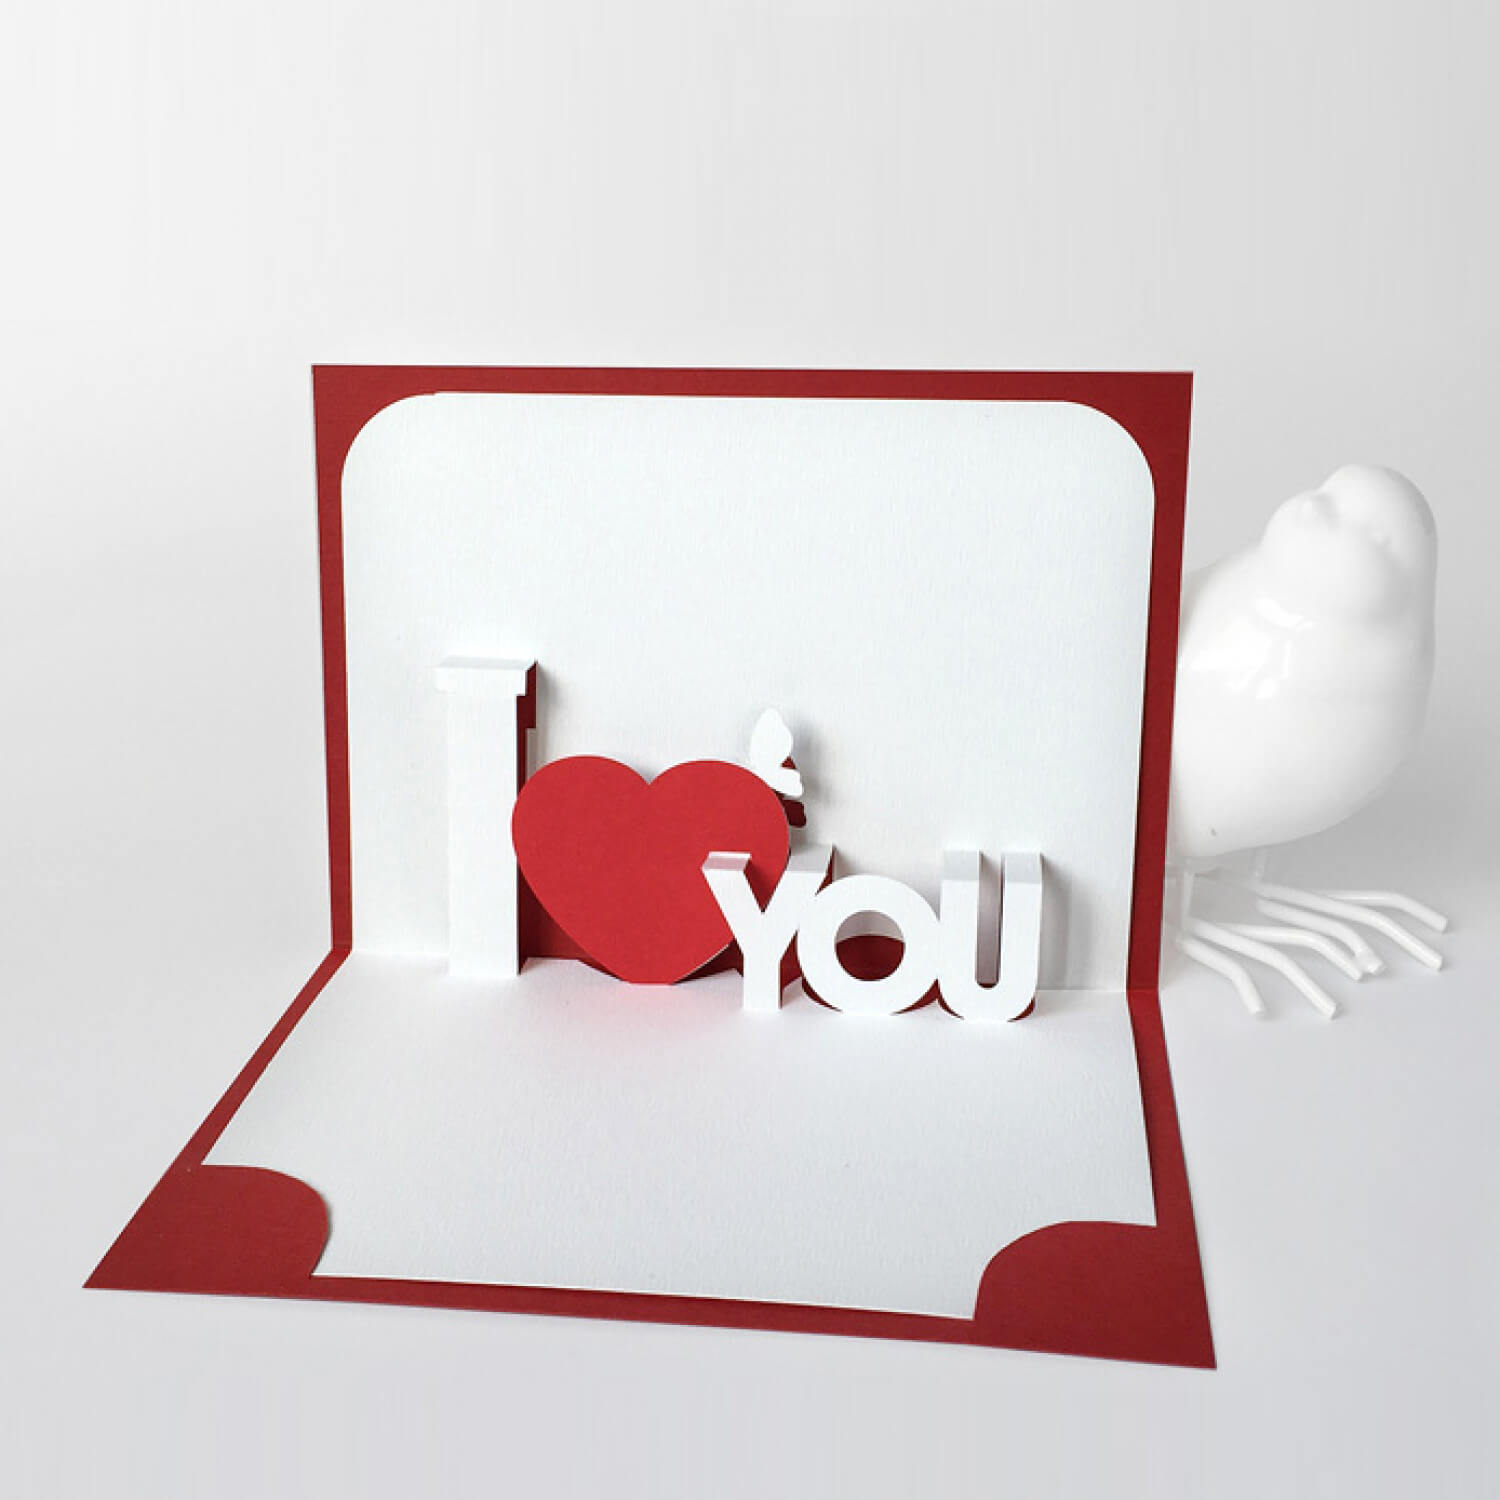 041 Template Ideas Pop Up Cards Templates Iloveu Shocking Intended For 3D Heart Pop Up Card Template Pdf